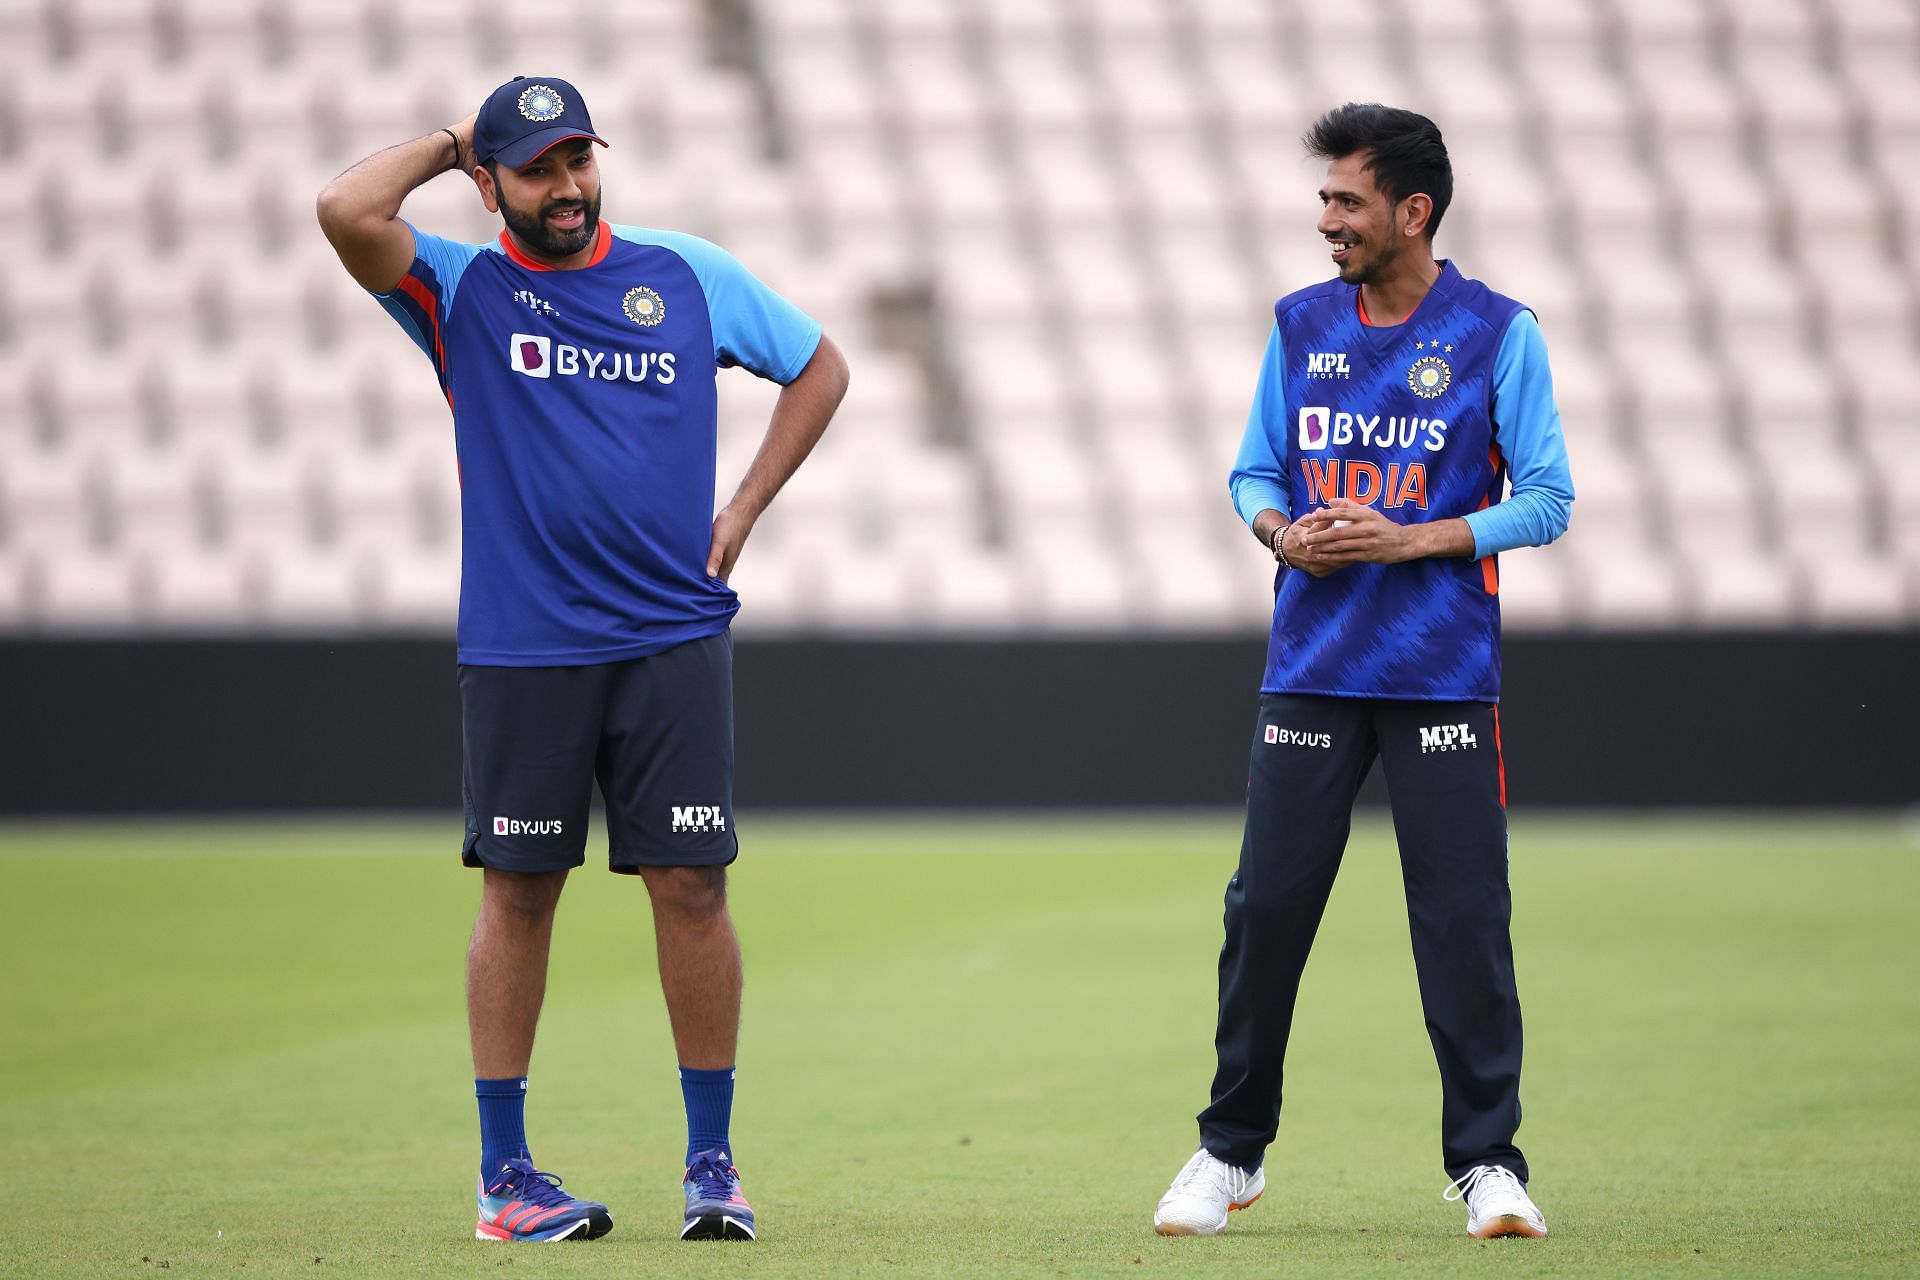 Yuzvendra Chahal (R) chats with the Indian captain. Pic: Getty Images